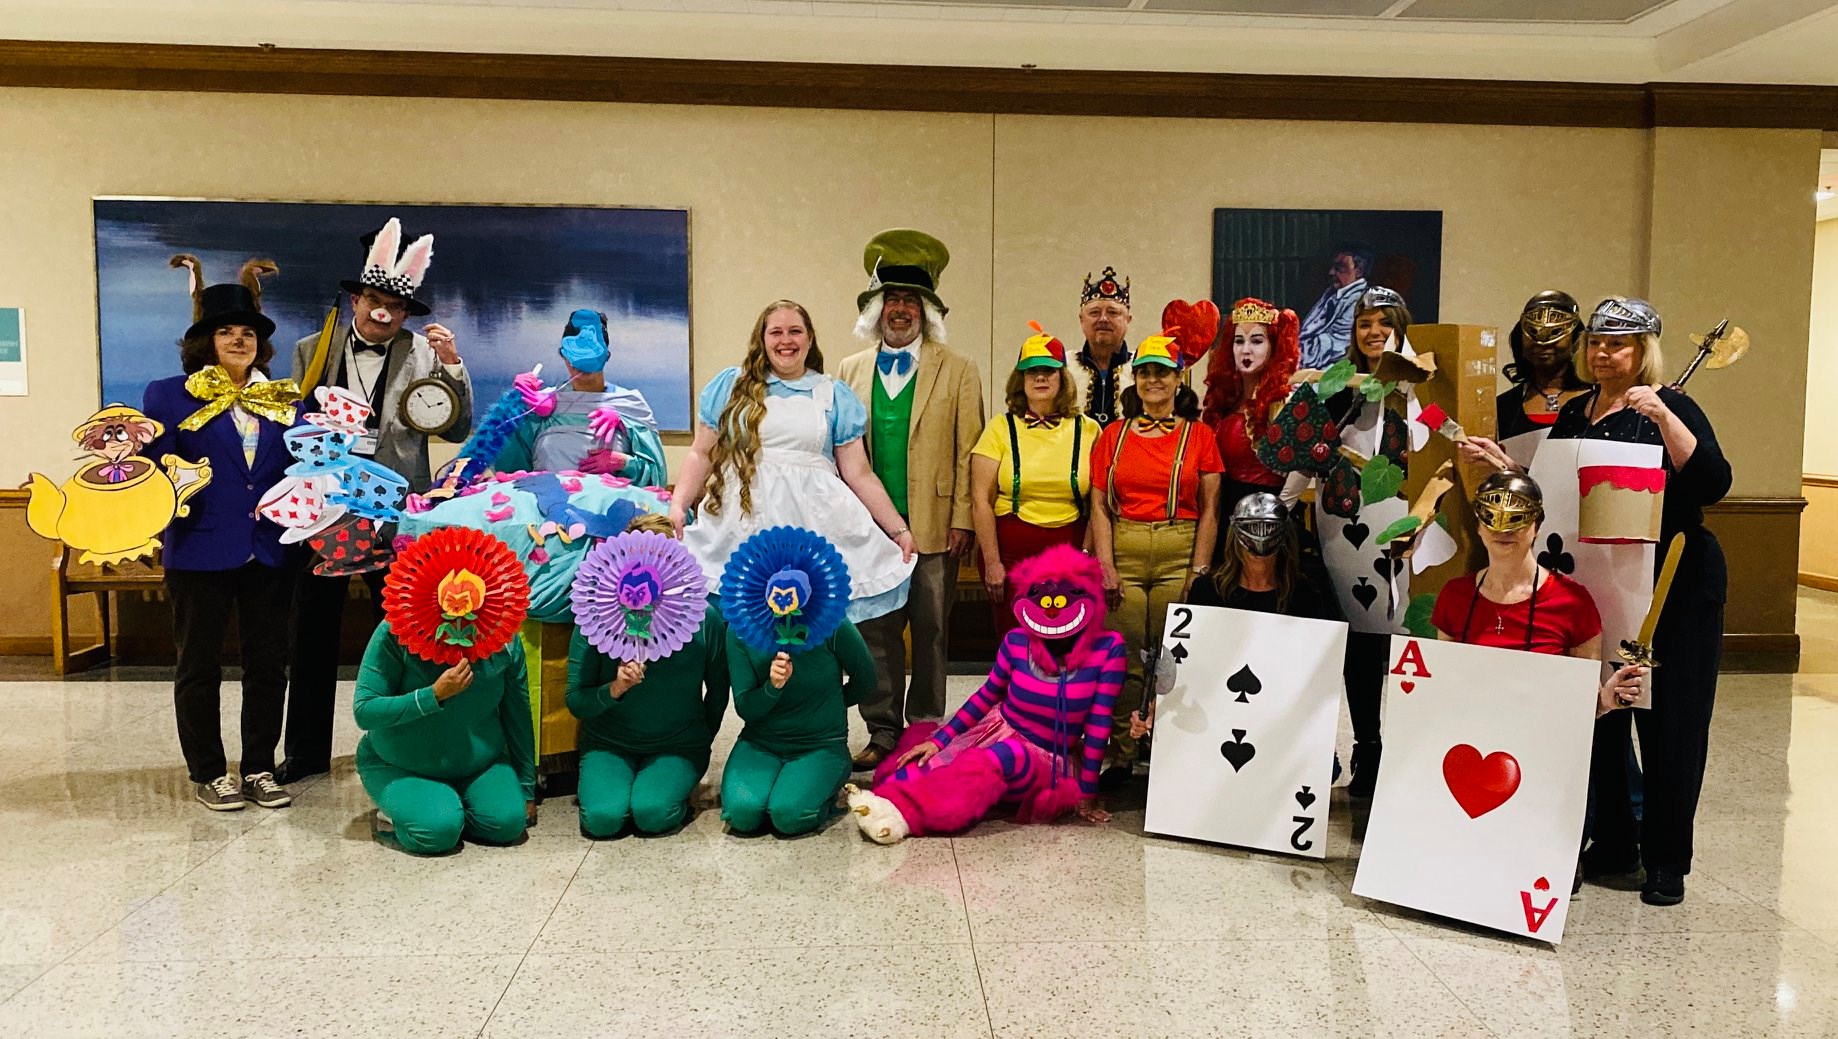 wonderland group costume pictures